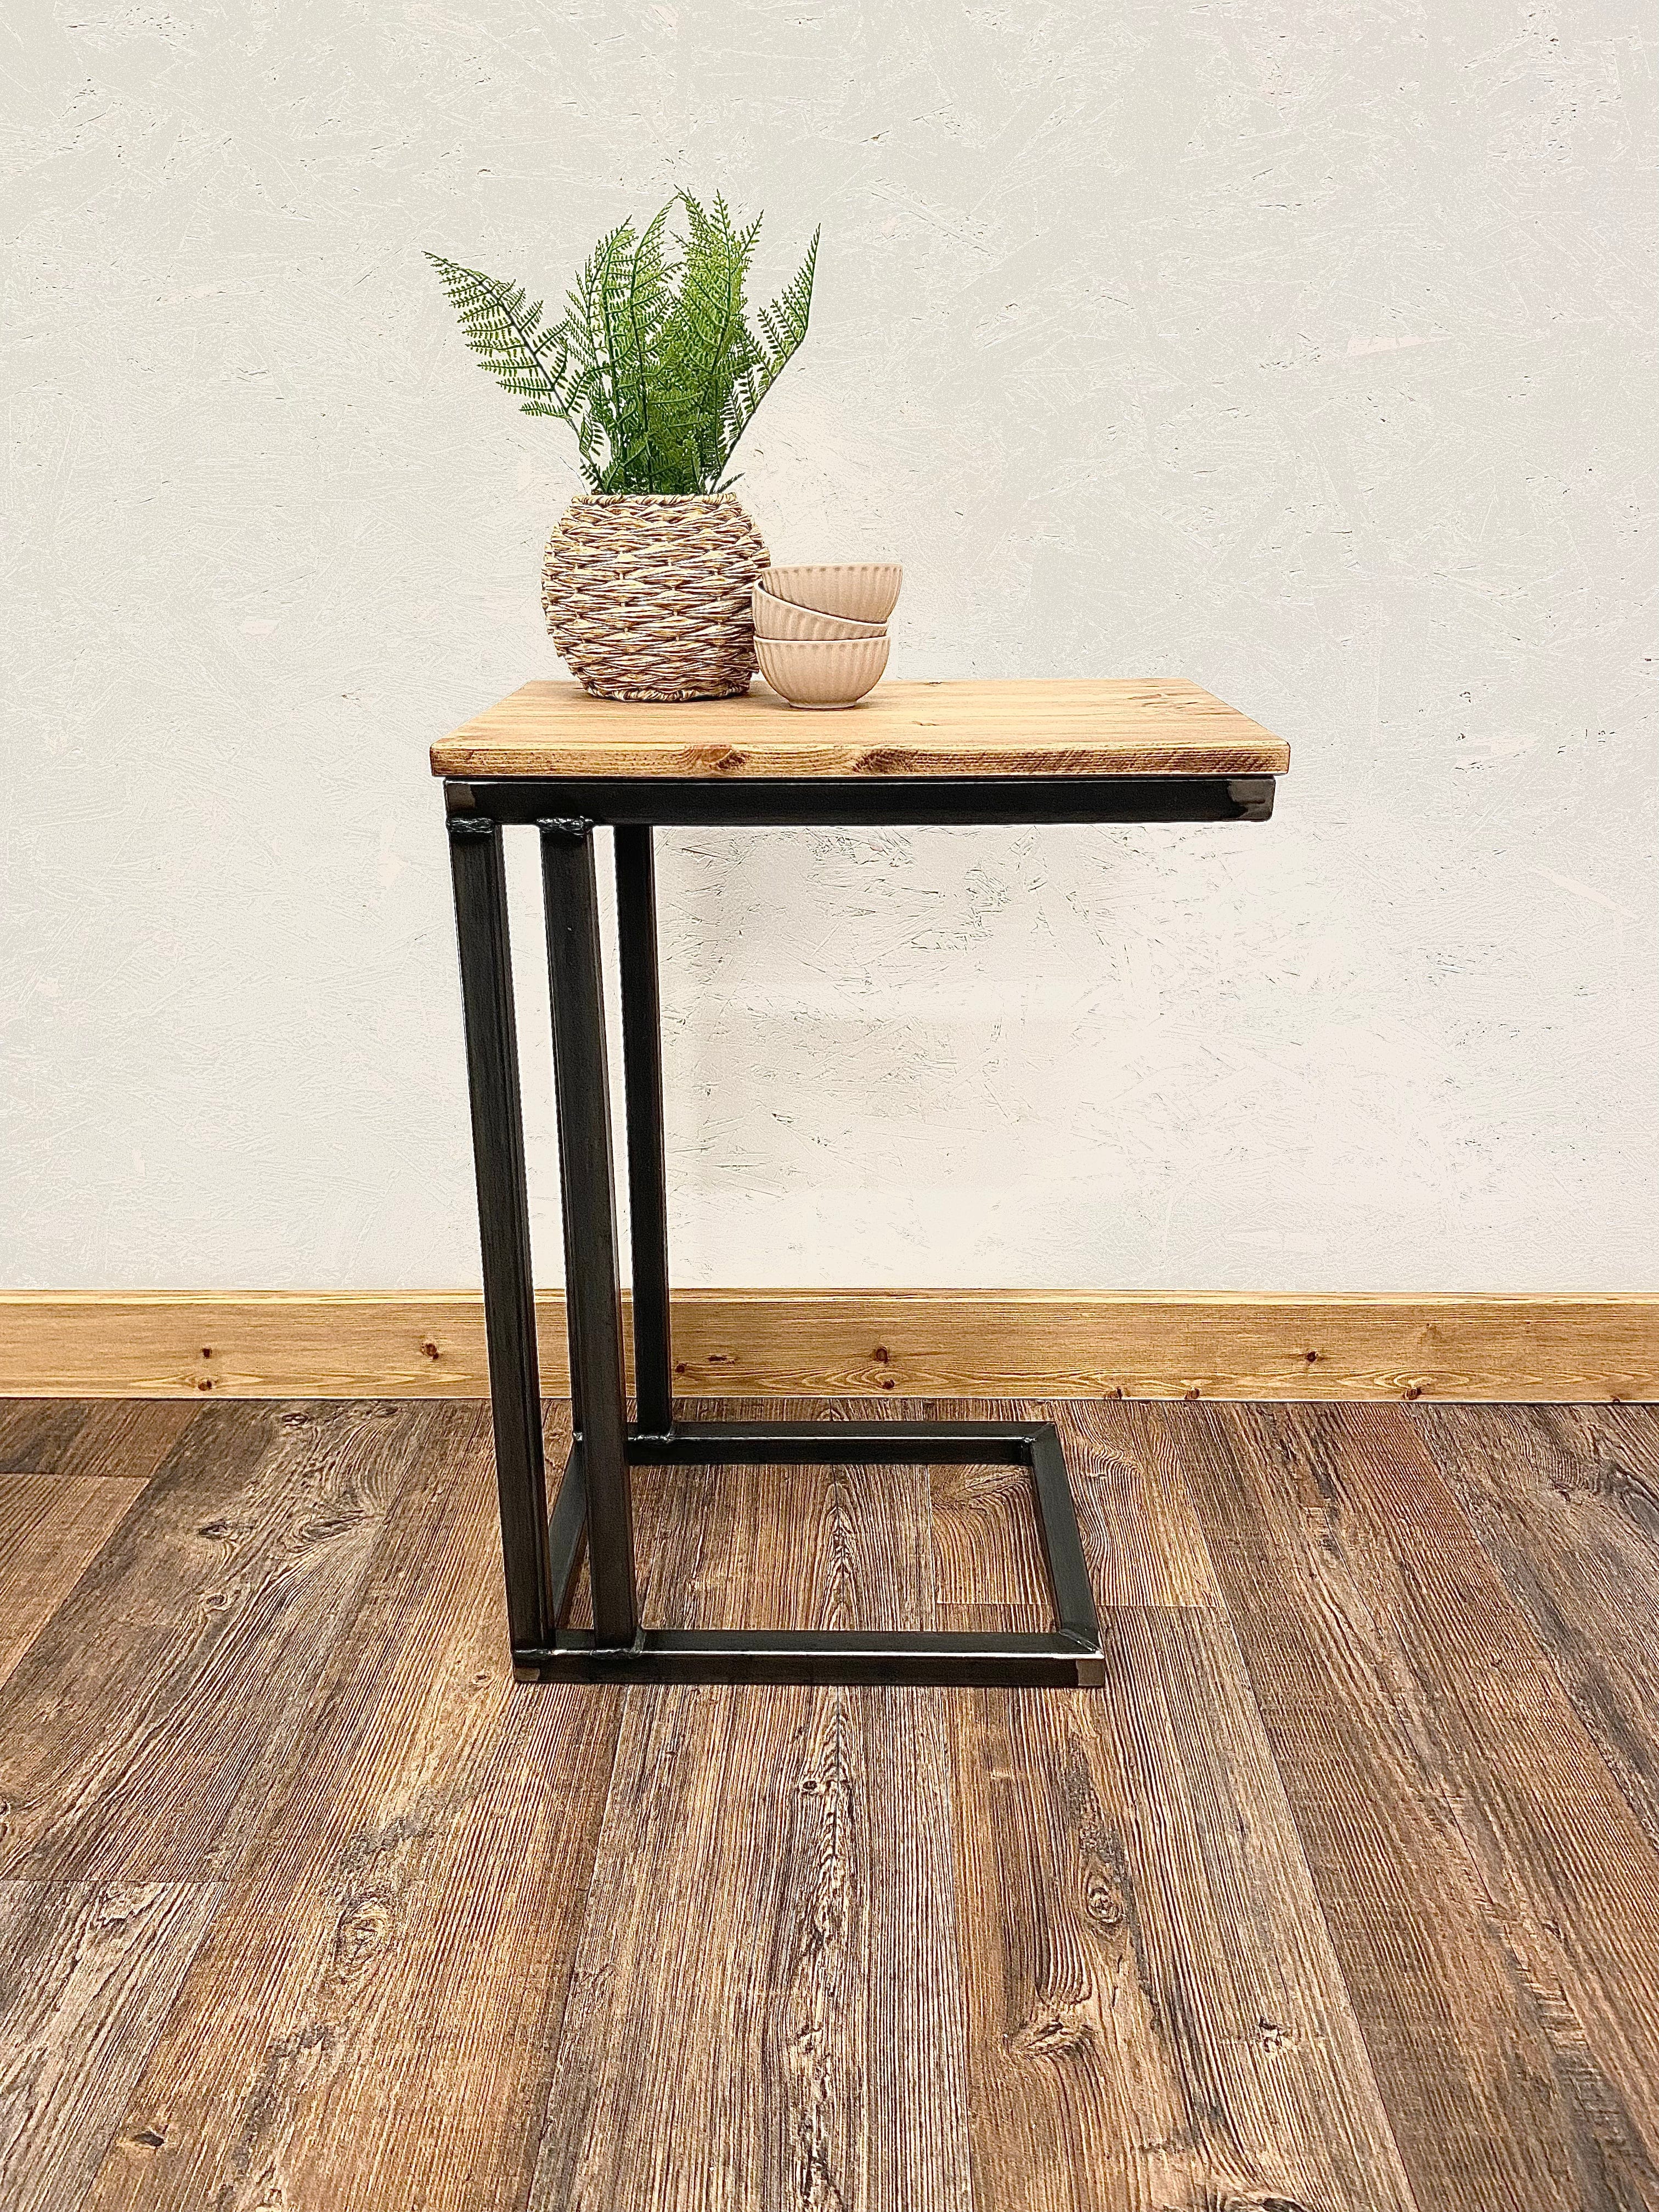 Rustic C Shaped Side table - Sofa table - Laptop table C shaped laptop table FREE DELIVERY   